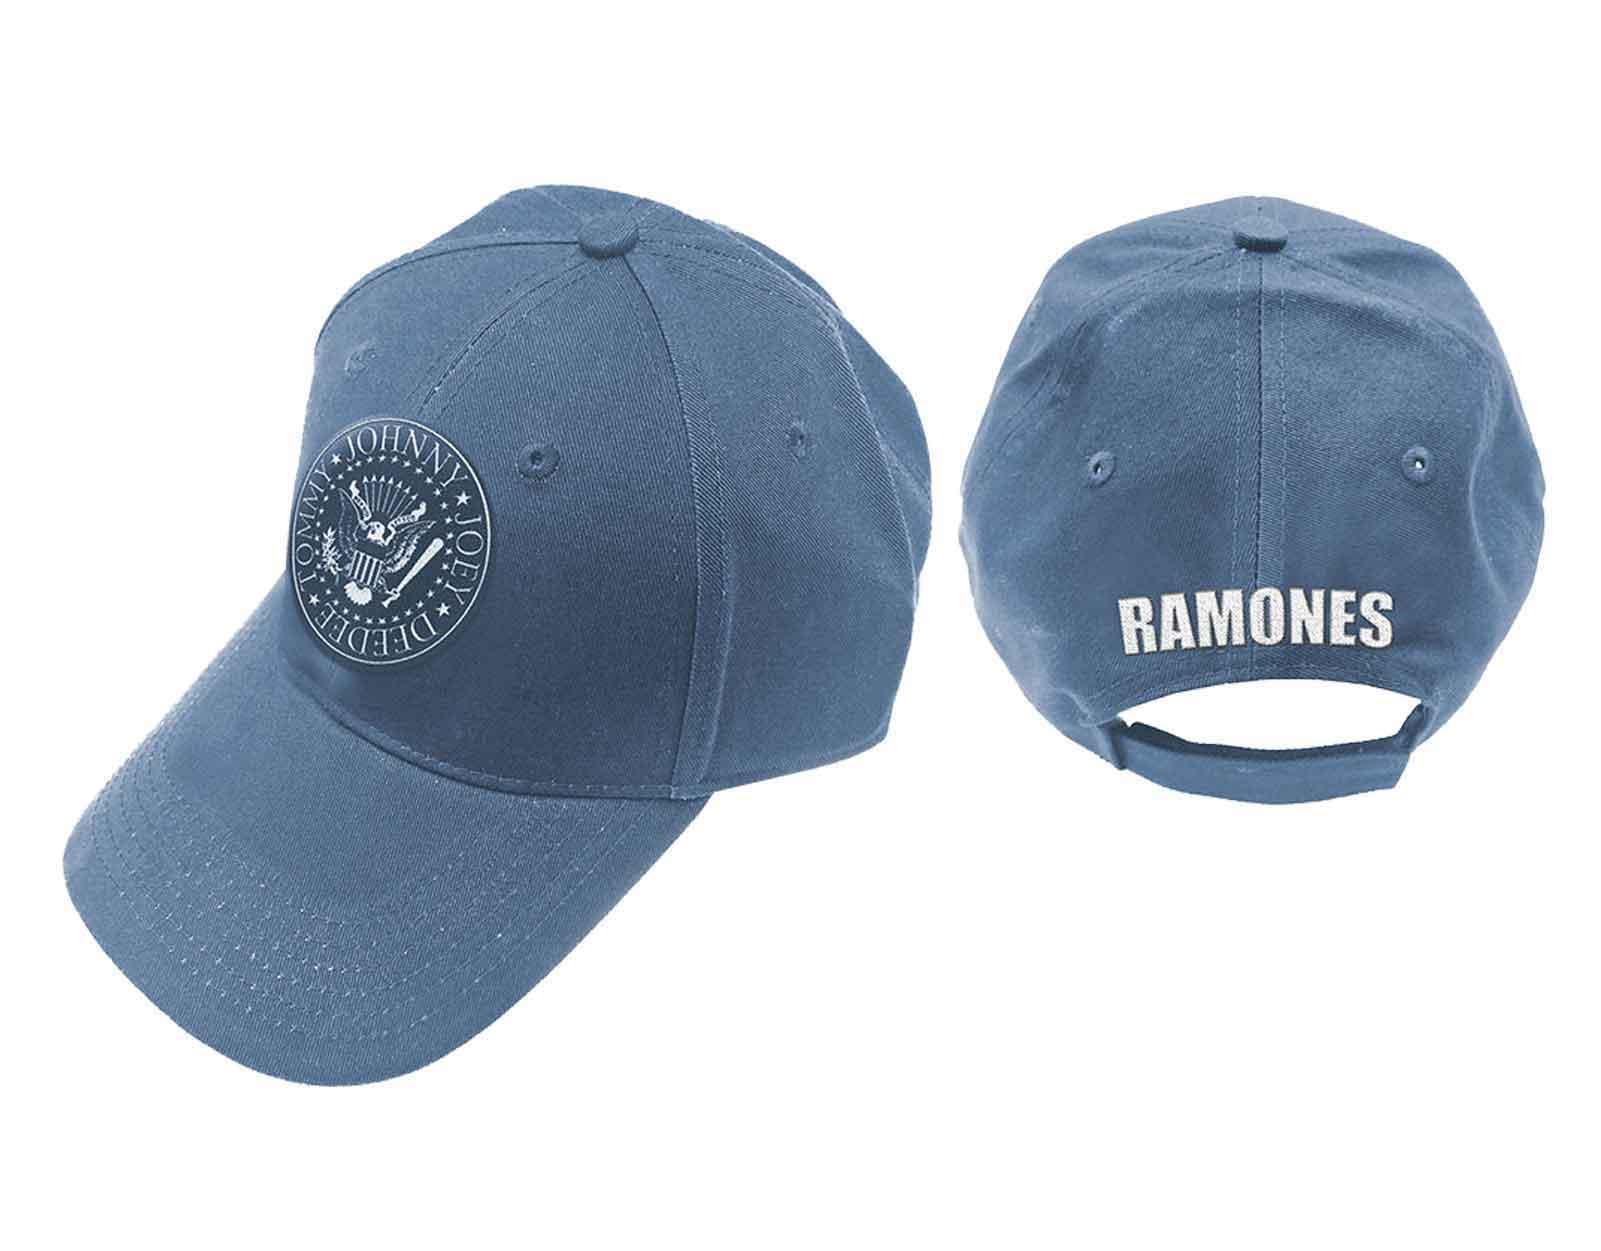 Ramones Baseball Cap Presidential Seal Band Logo new Official Strapback One Size